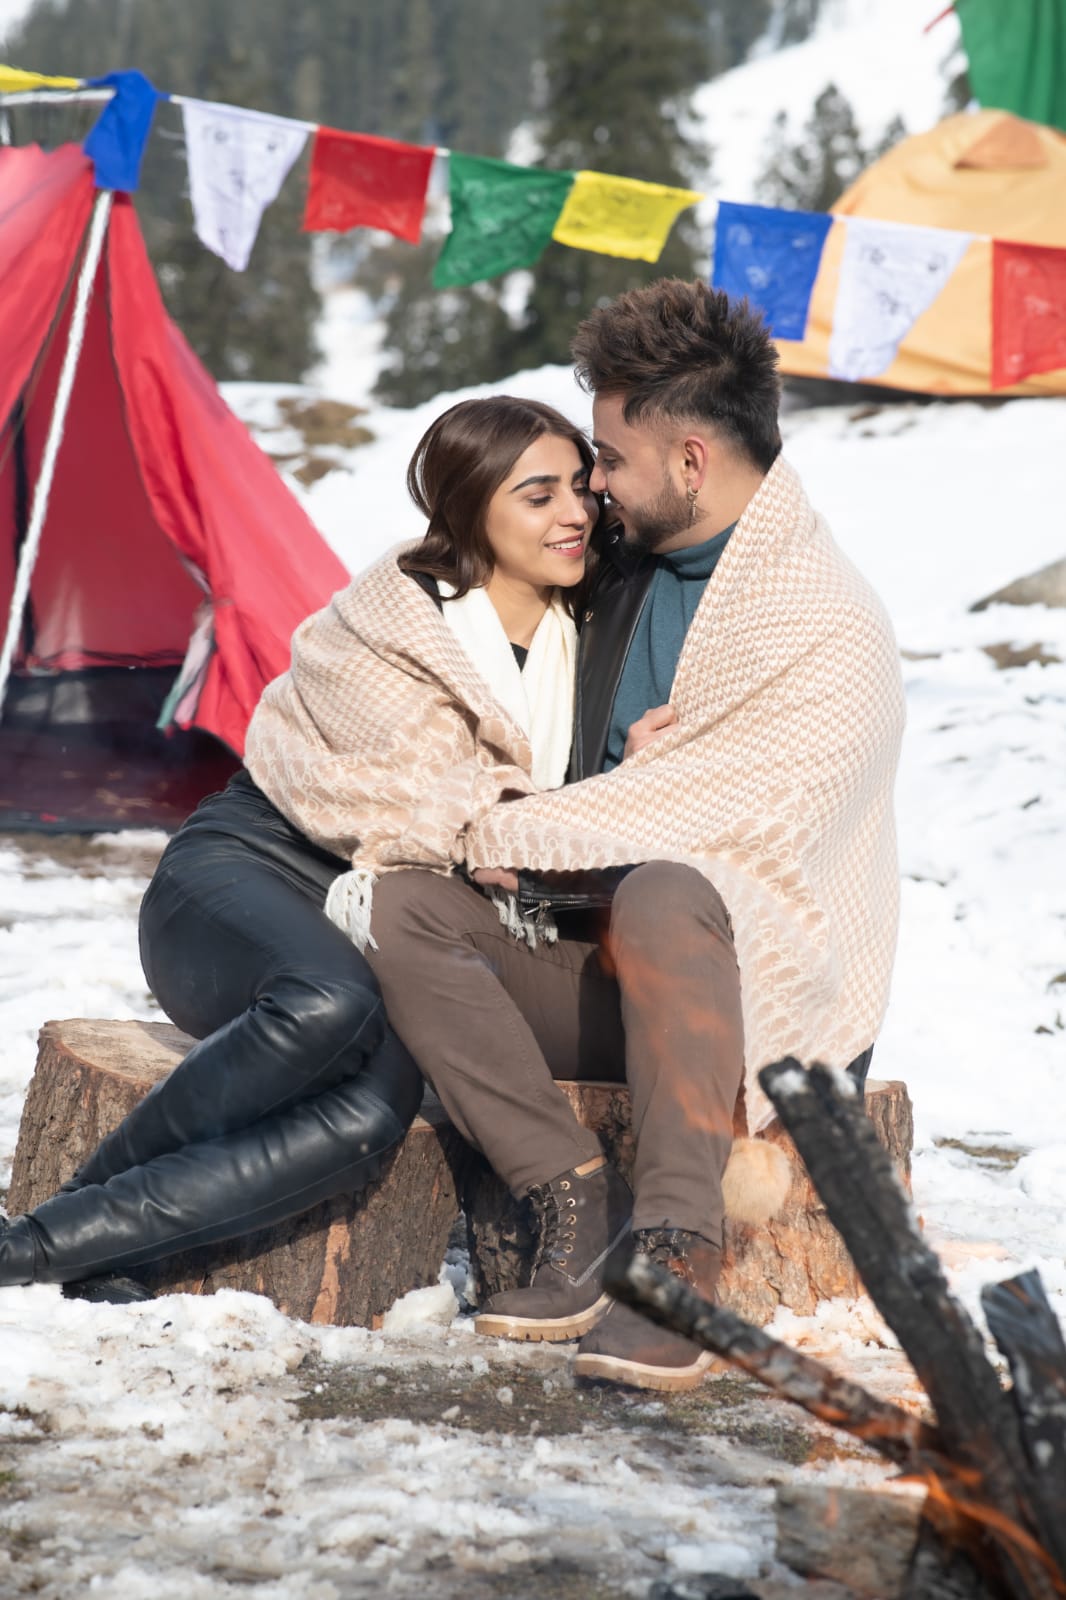 On their D-Day, Millind Gaba and Pria Beniwal Gaba give surprise gift to their fans; launch their single Shaadi Karke Le Jayega Mujhe